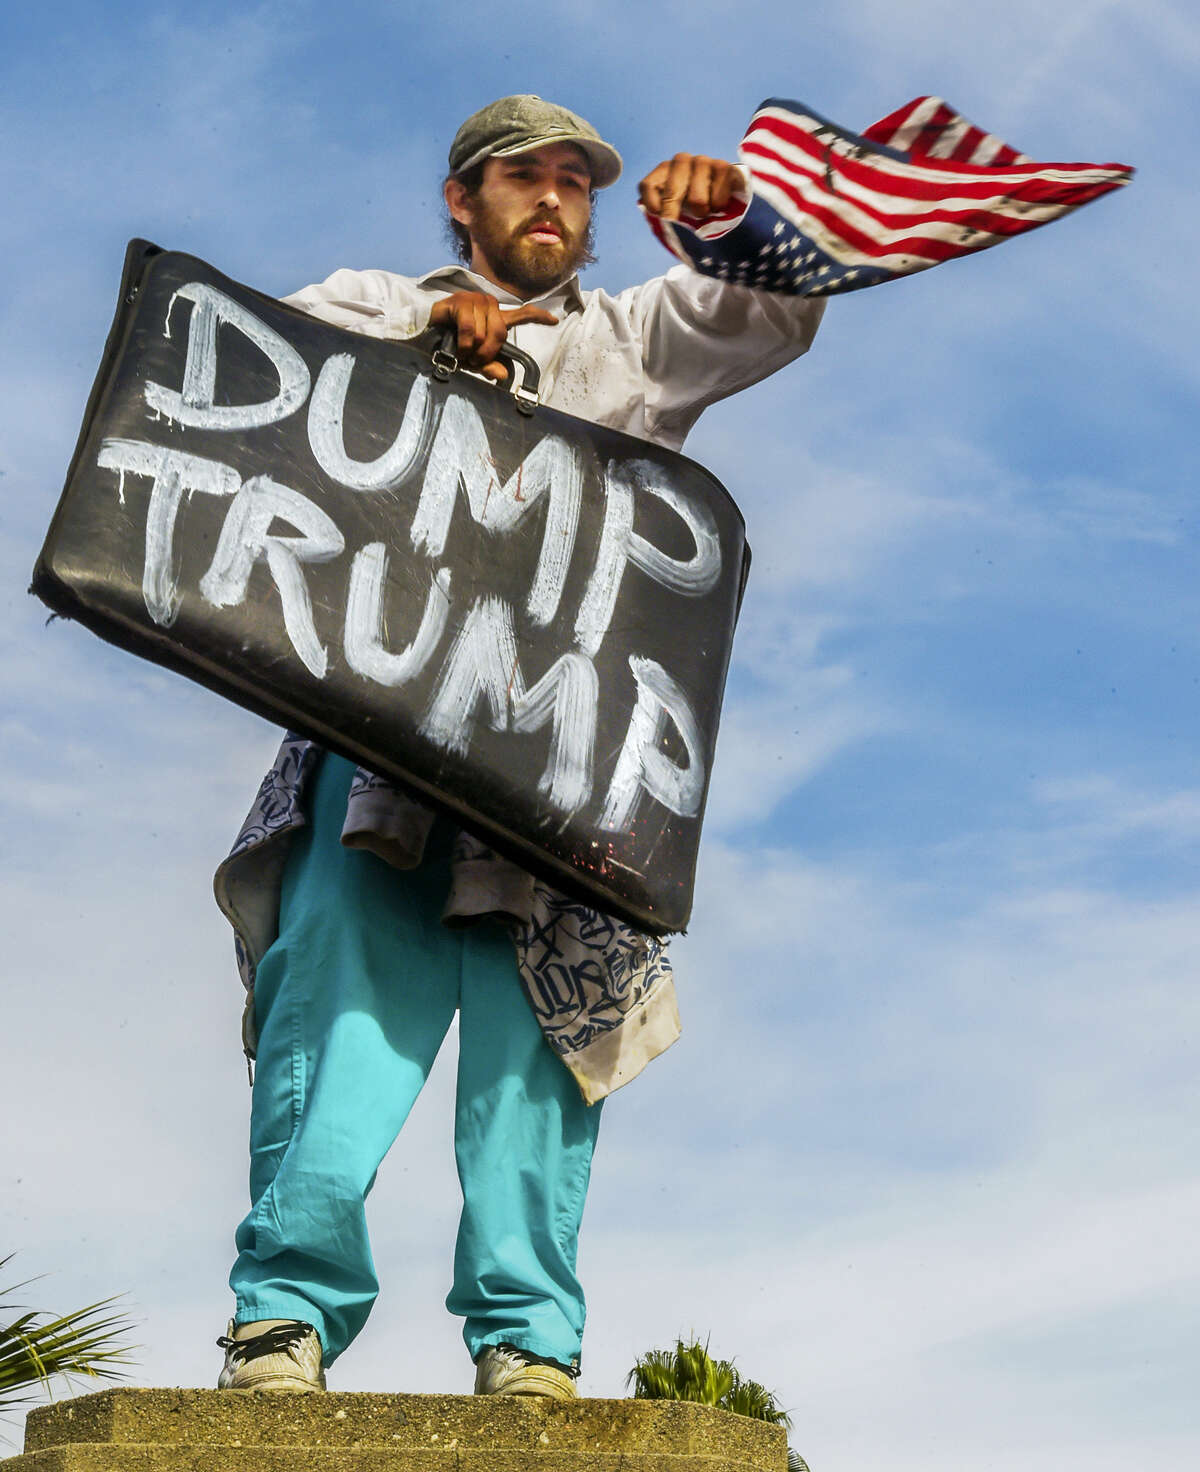 A protester demonstrates in an anti-Trump protest against President-elect, Donald Trump, that started at MacArthur Park and ended at the Edward Royal Federal Building in downtown Los Angeles on Nov. 12, 2016. Several thousand people marched through downtown streets Saturday to condemn what they saw as Trump’s hate speech about Muslims, pledge to deport people in the country illegally and crude comments about women.